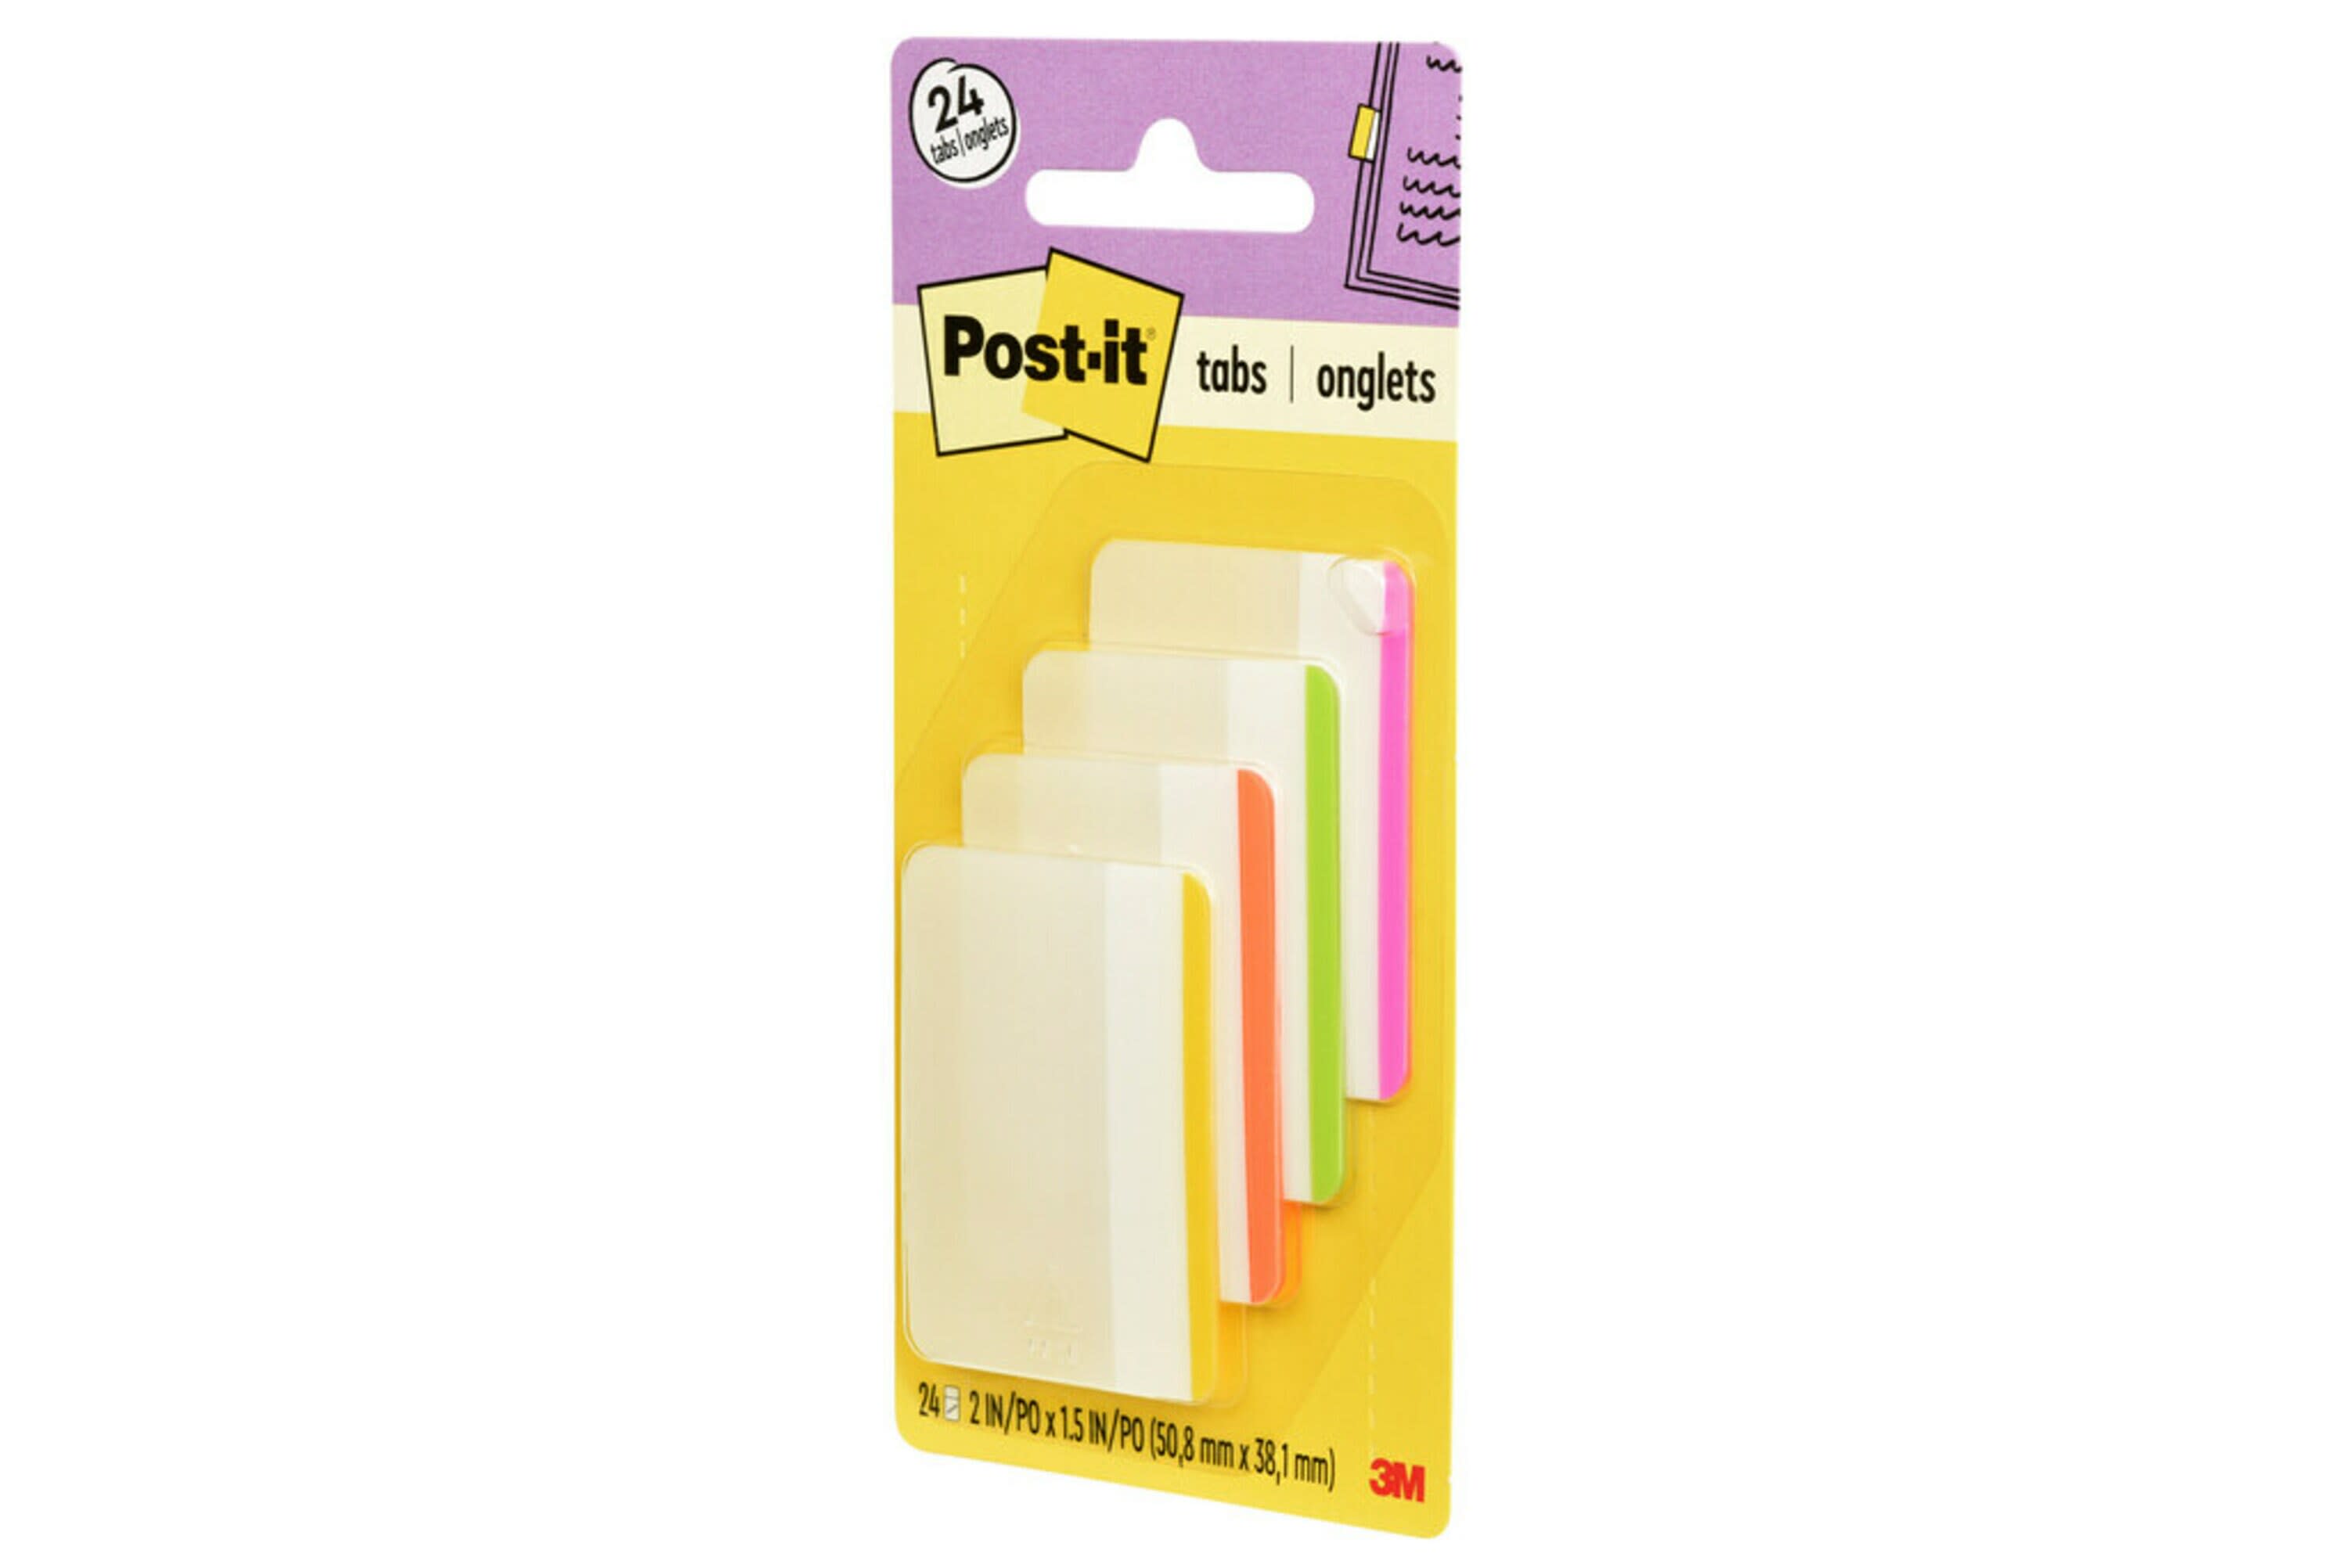 Post-it Durable Tabs 686F-1BB, 2 in x 1.5 in (50.8 mm x 38 mm) Beige, Green, Red, Canary Yellow 24 pk/cs